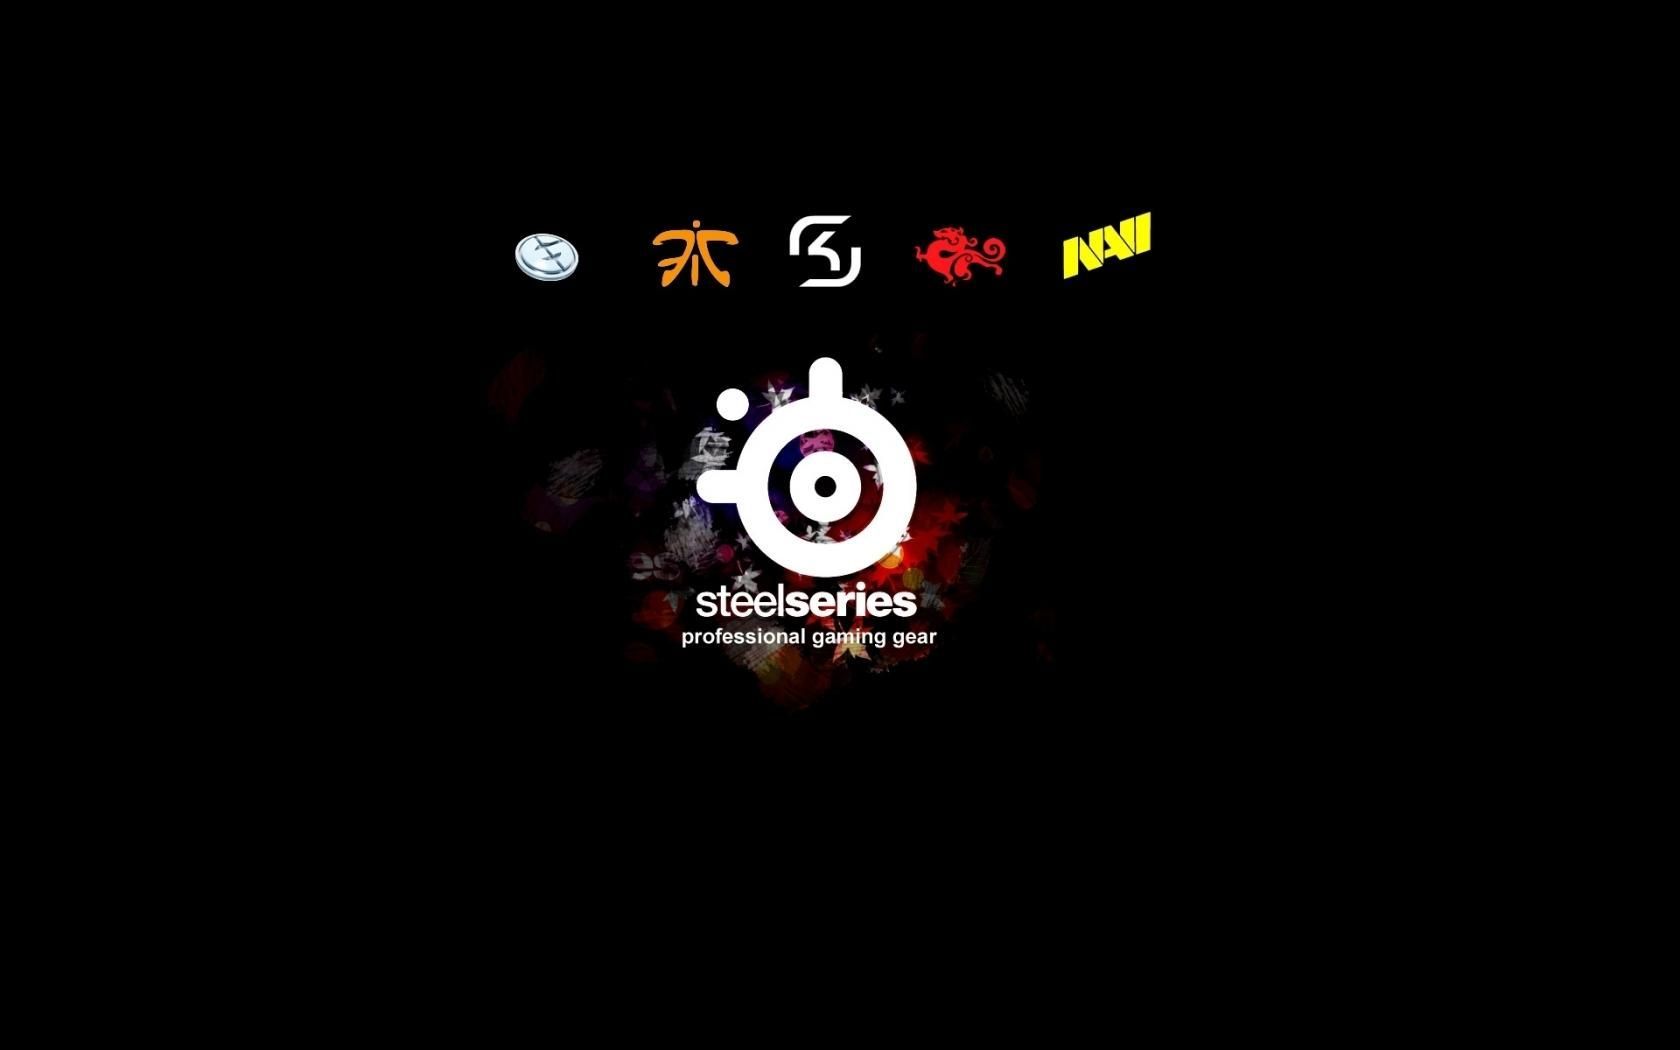 Wallpapers Steelseries Hd For And 1680x1050 #steelseries